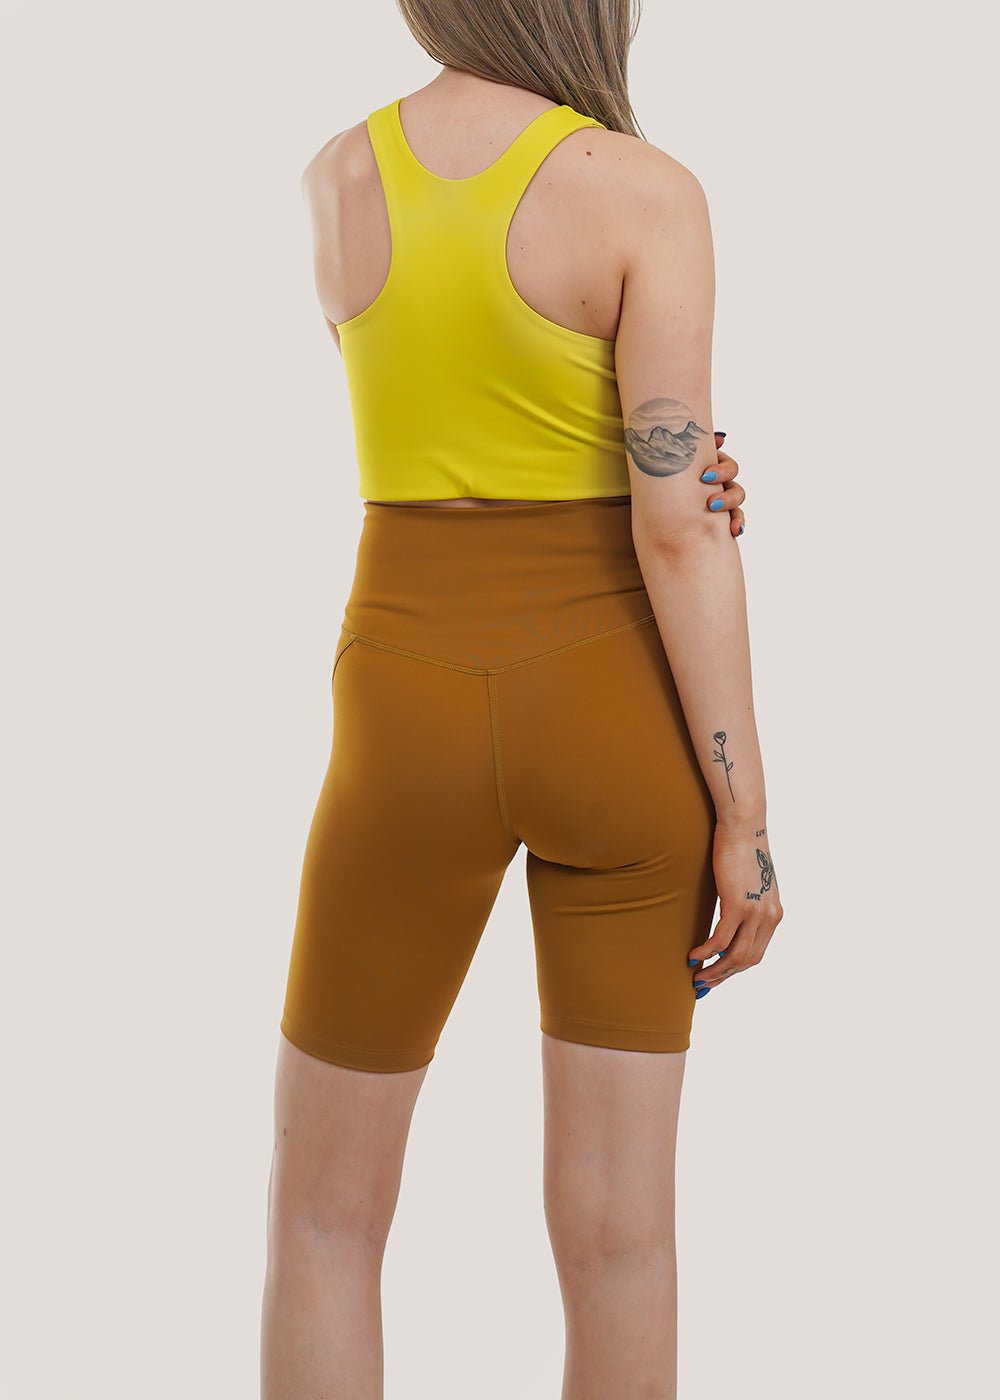 Girlfriend Collective Saddle High Rise Bike Short - New Classics Studios Sustainable Ethical Fashion Canada